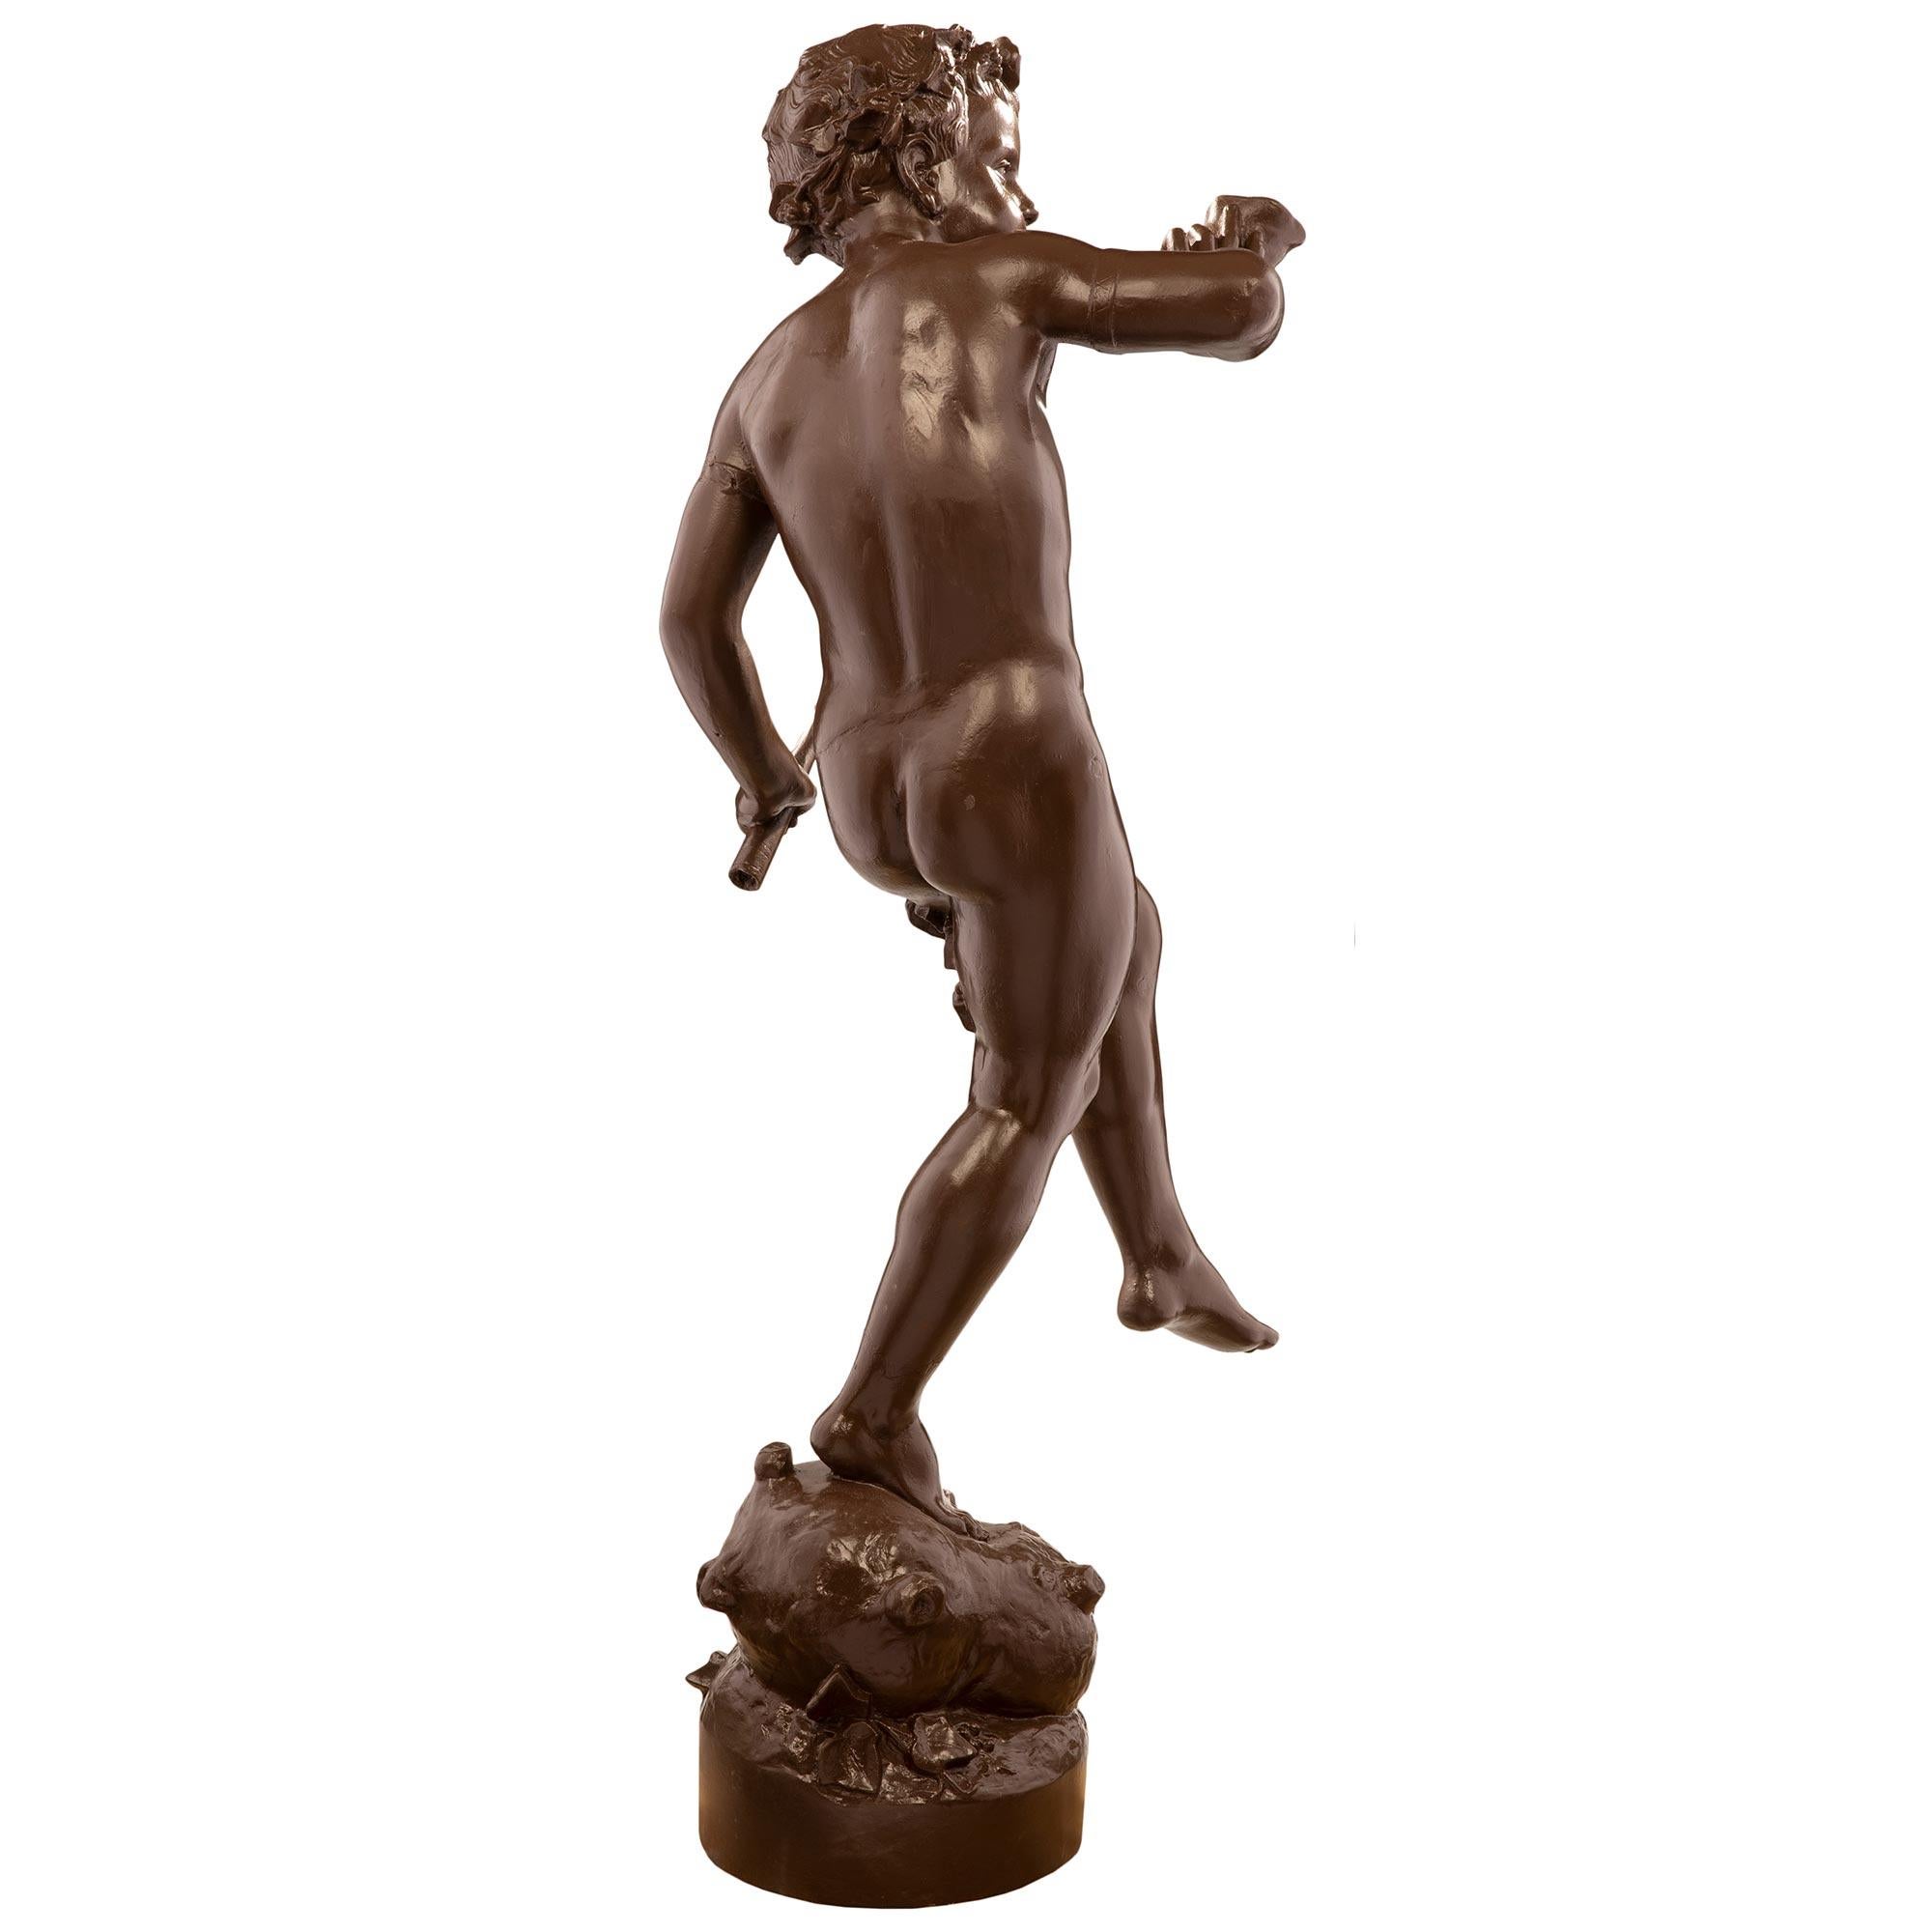 French 19th Century Cast Iron Statue of a Young Boy, Signed ‘A. DURENNE, Paris’ For Sale 1